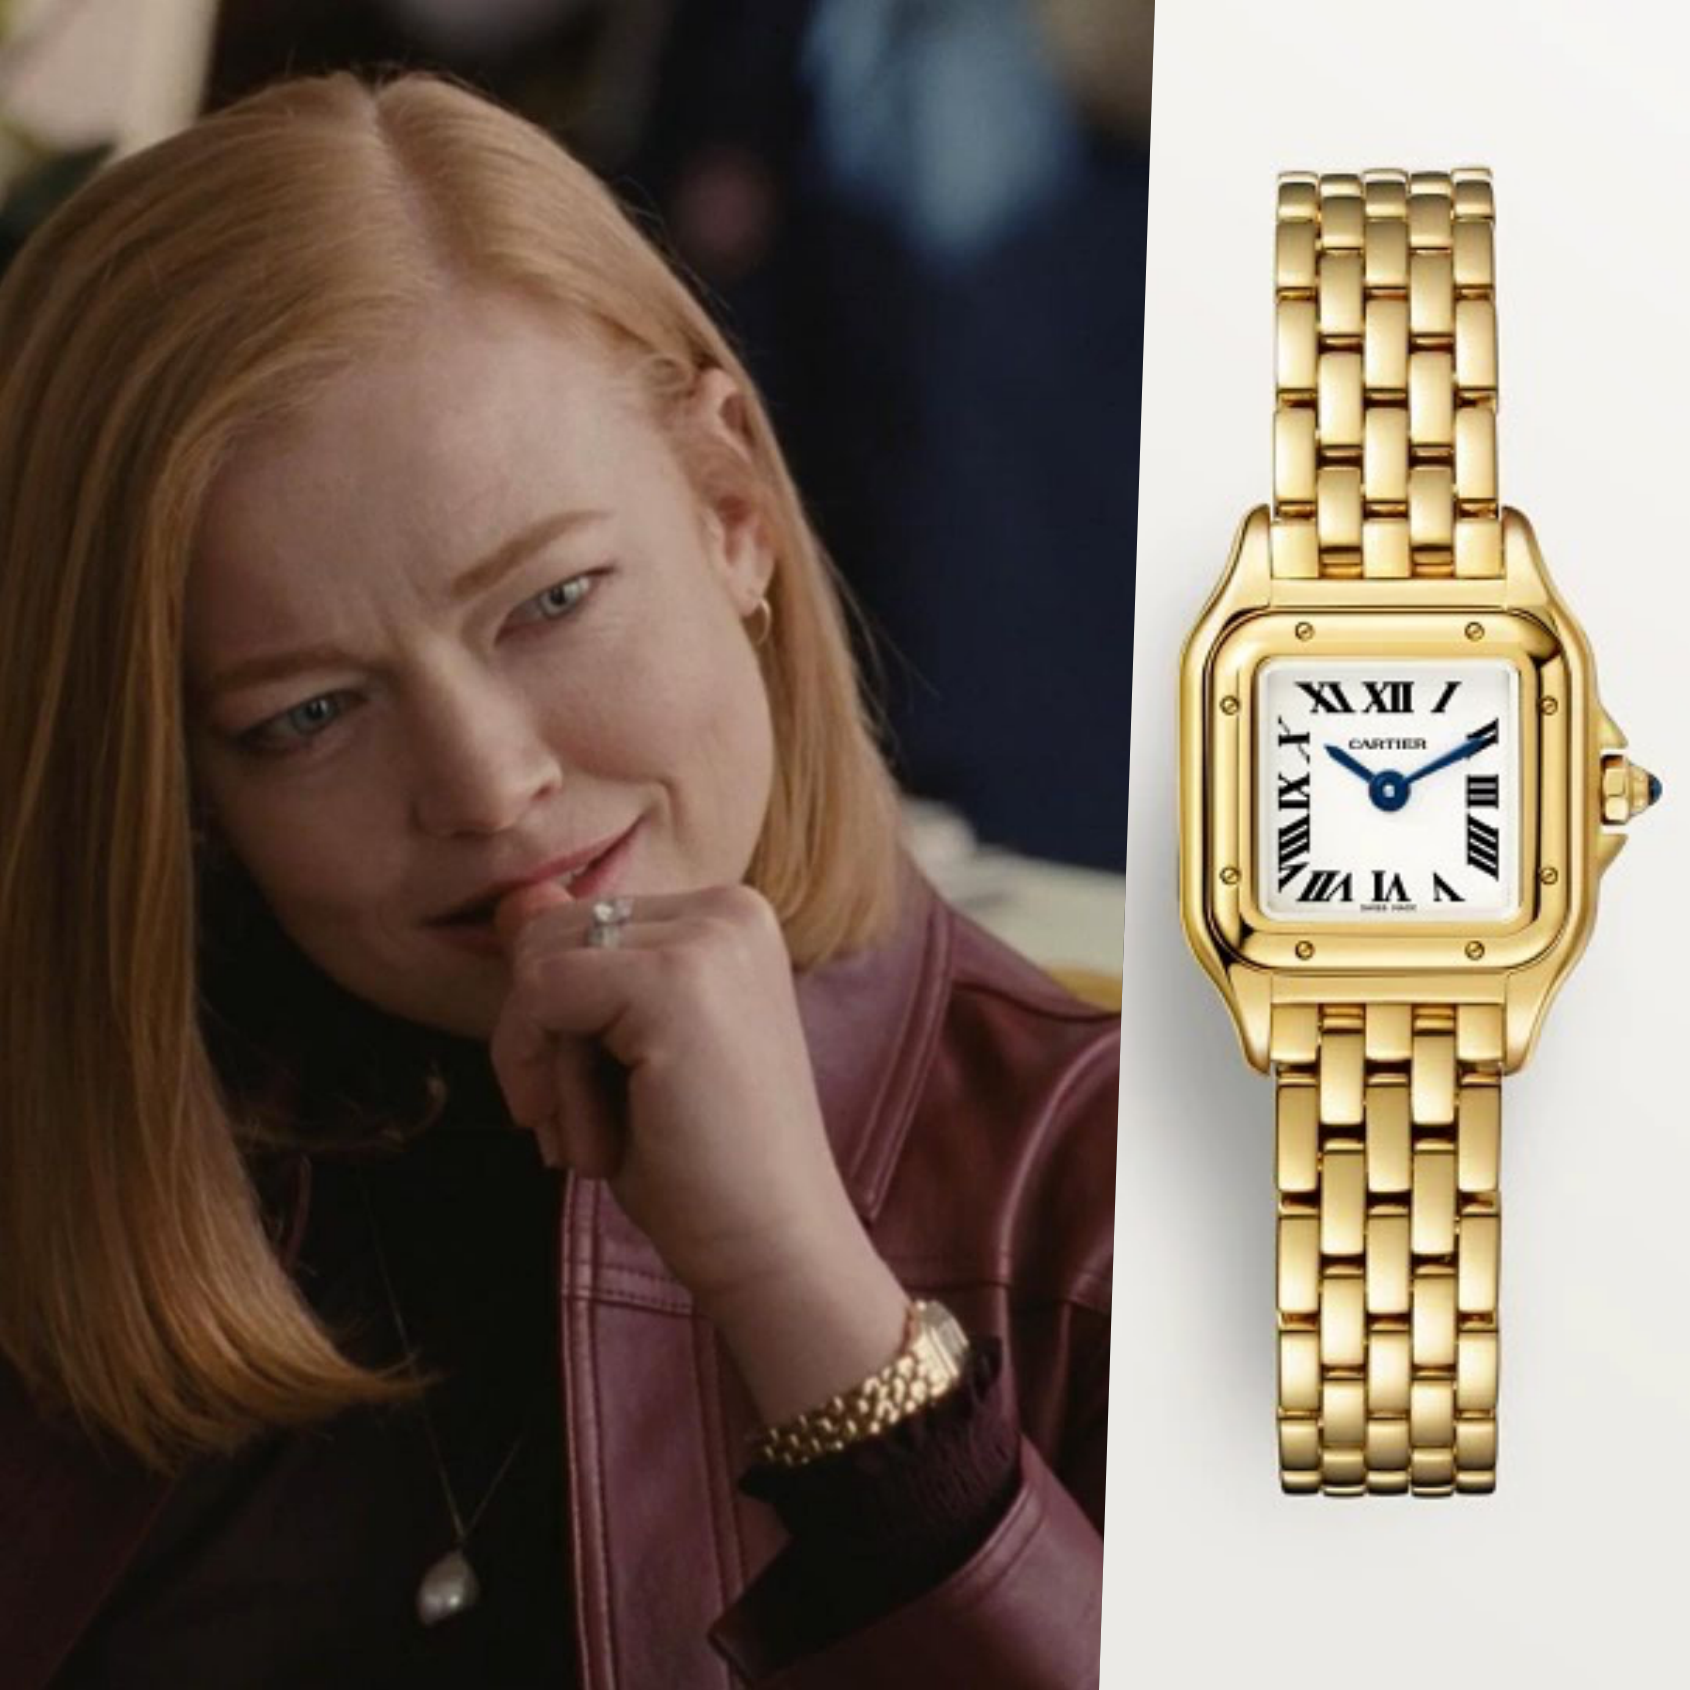 What are some celebrities that used to wear Cartier Tank watches